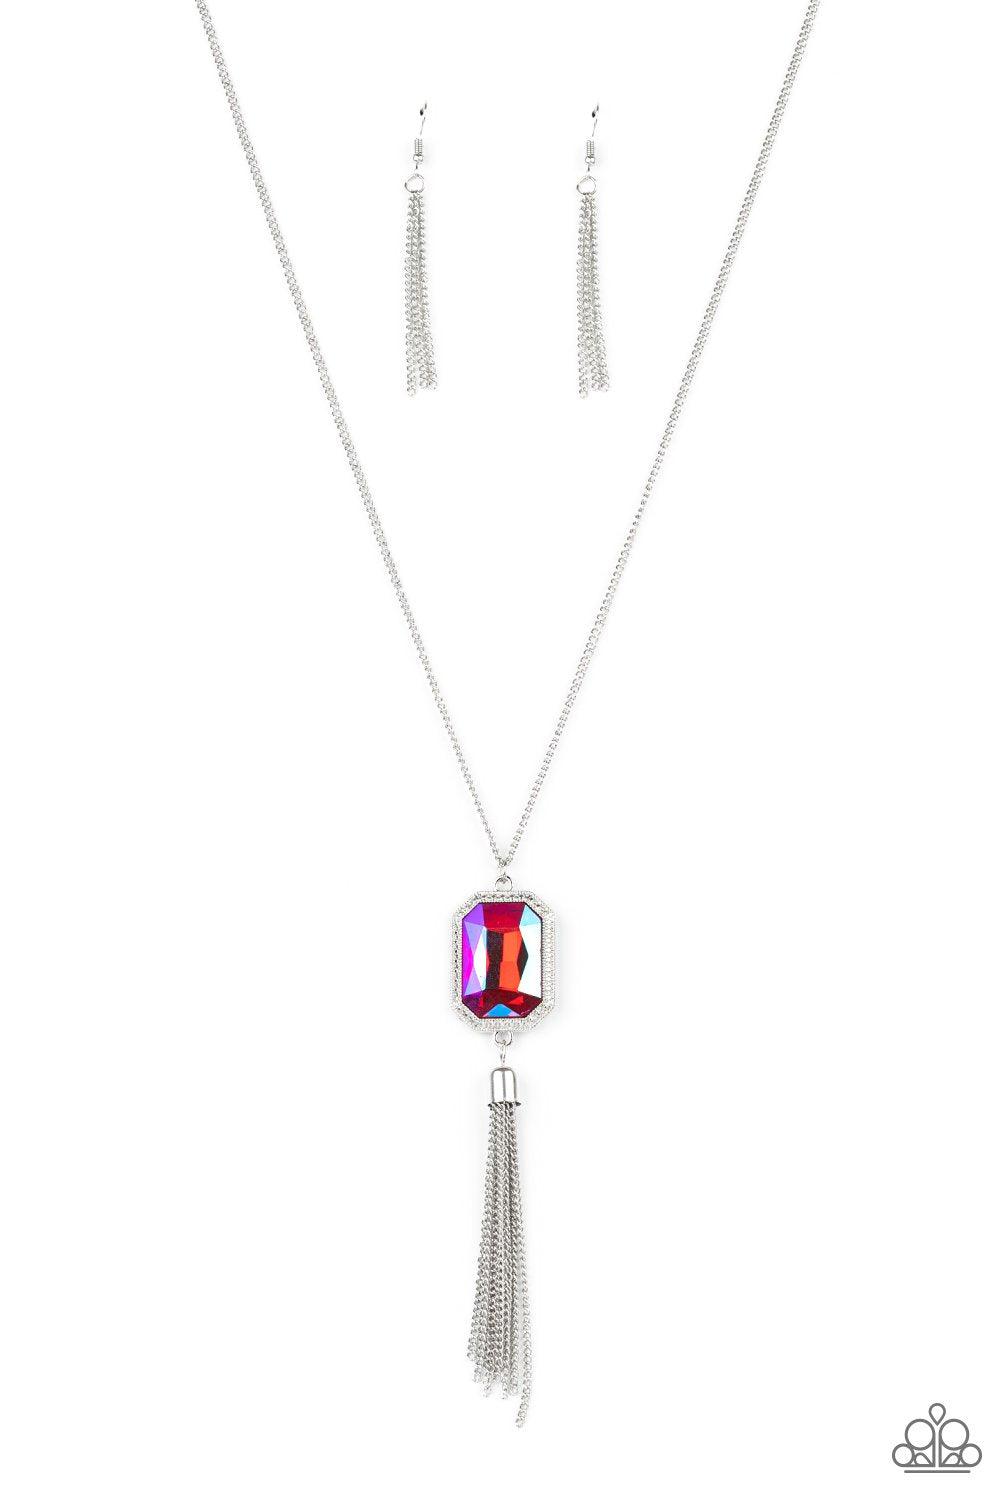 Blissed Out Opulence Pink Iridescent Gem Tassel Necklace - Paparazzi Accessories- lightbox - CarasShop.com - $5 Jewelry by Cara Jewels